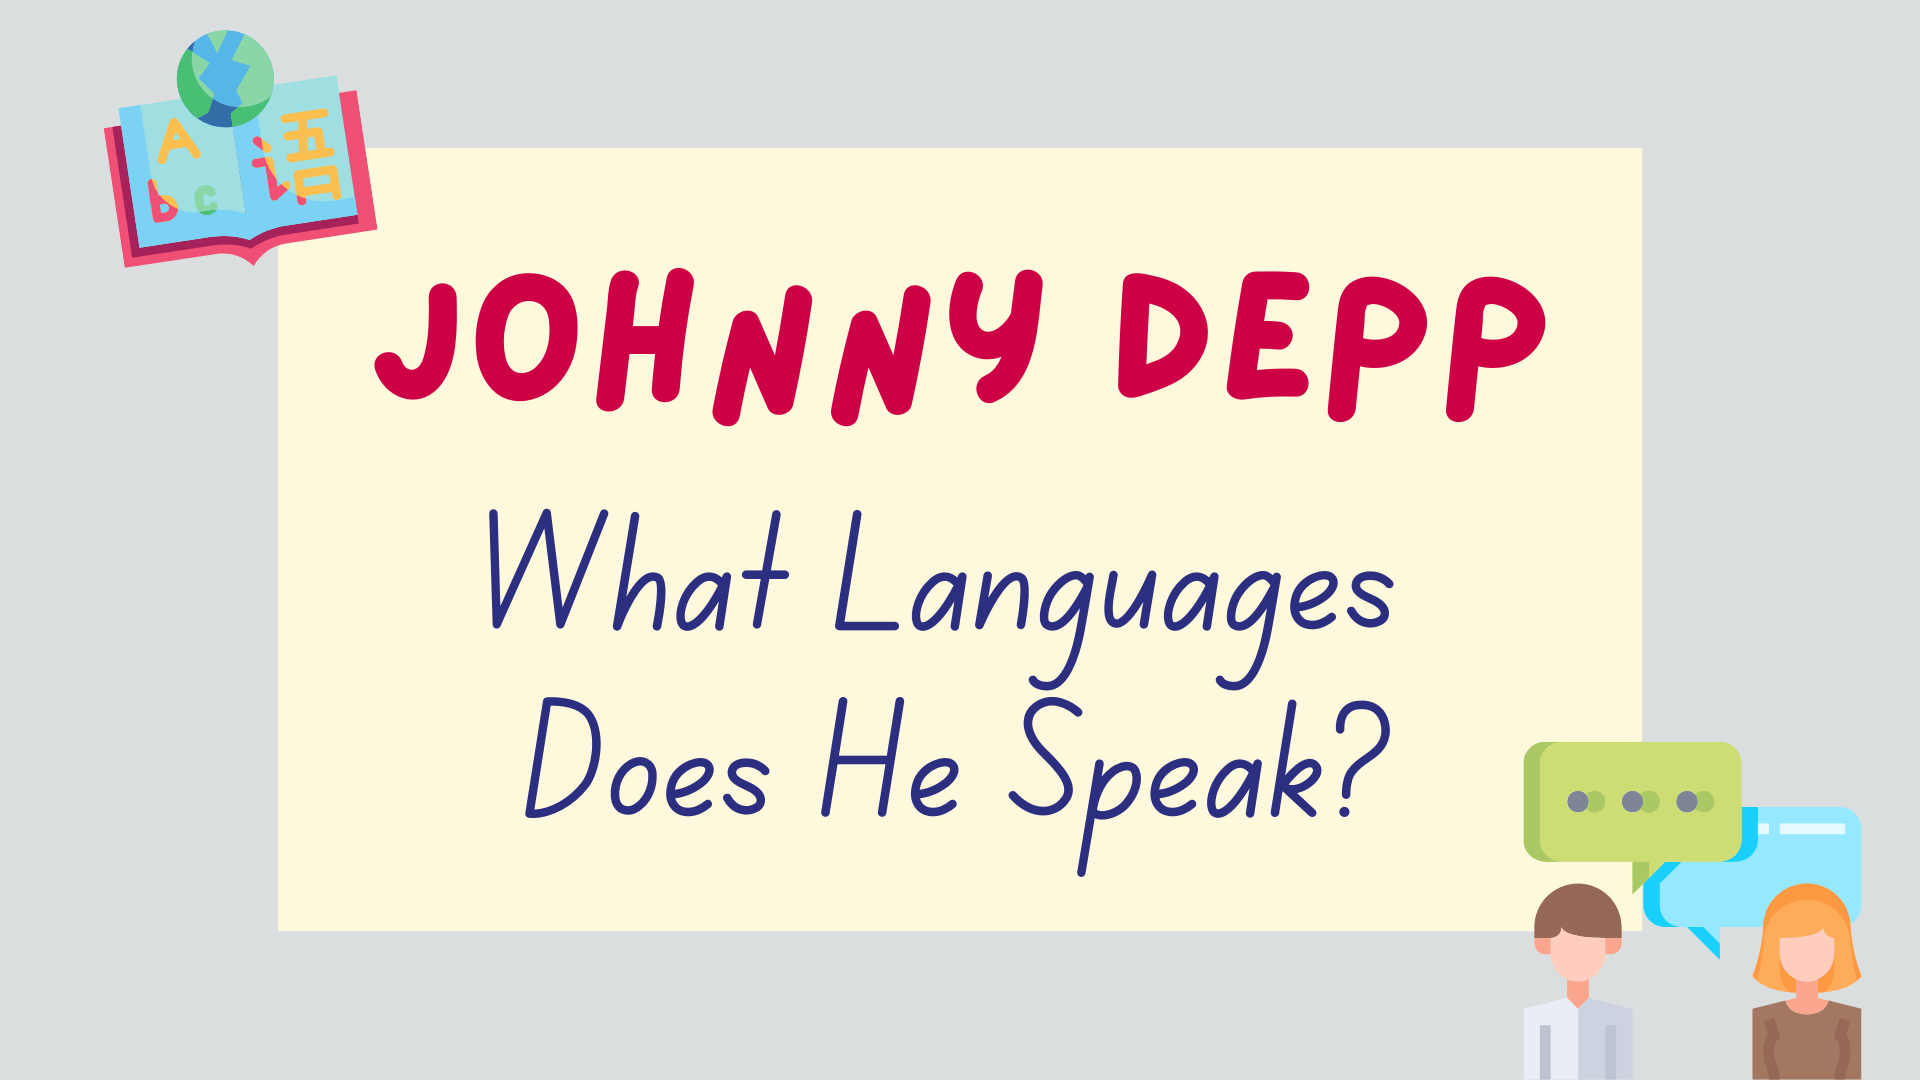 what languages does Johnny Depp speak? - featured image